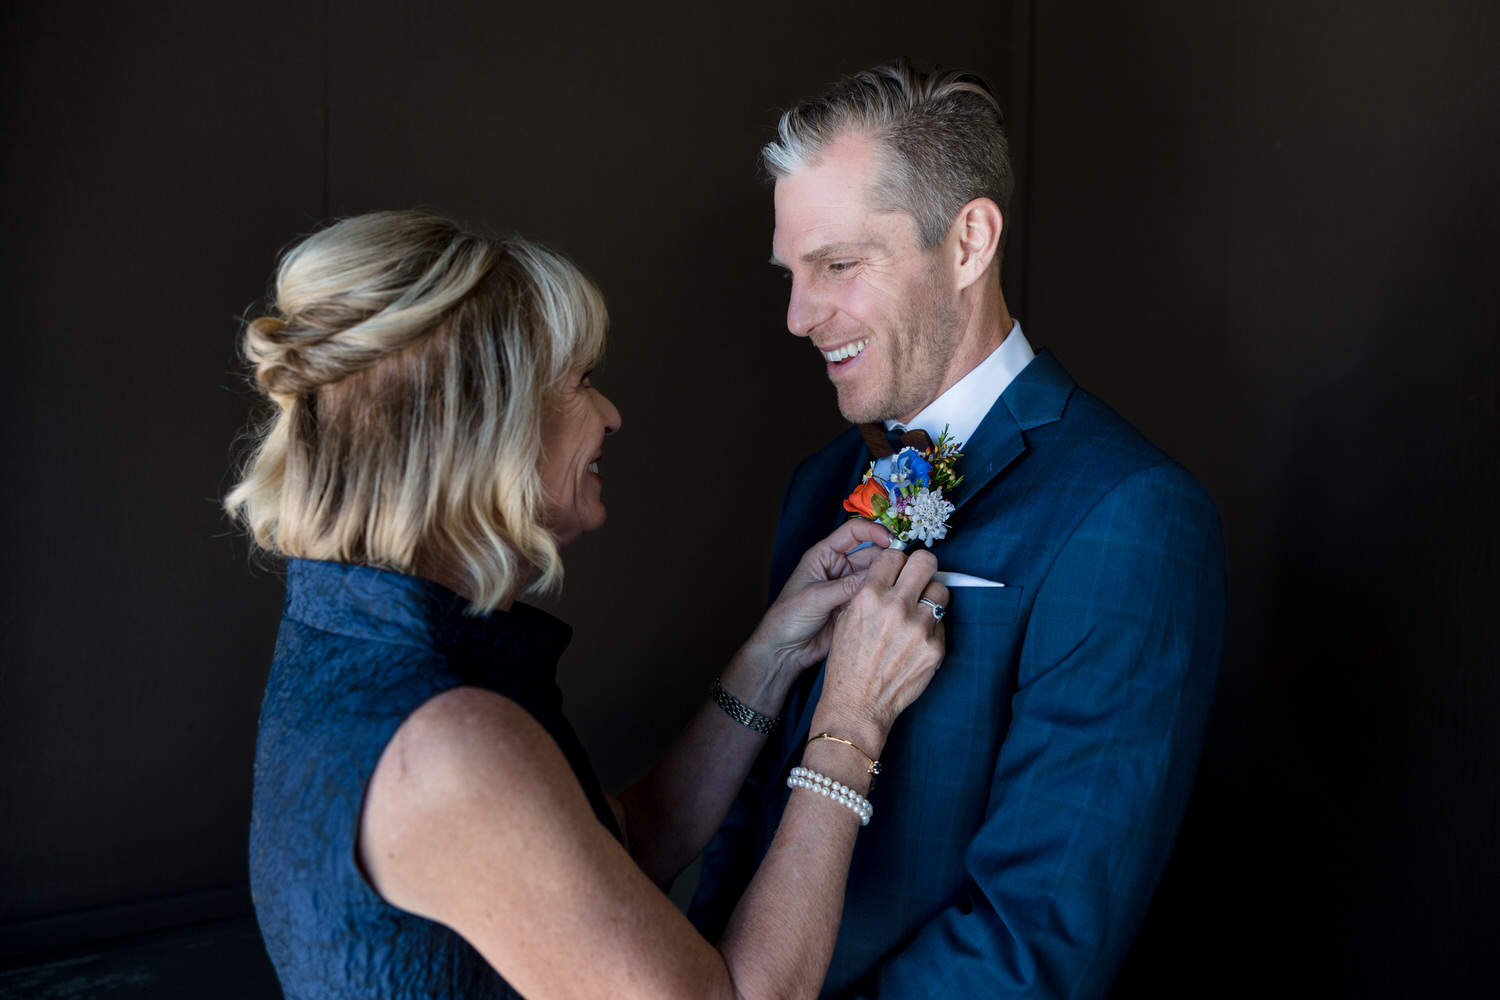 Mom pinning the groom's colorful flower boutonnière on his jacket lapel.